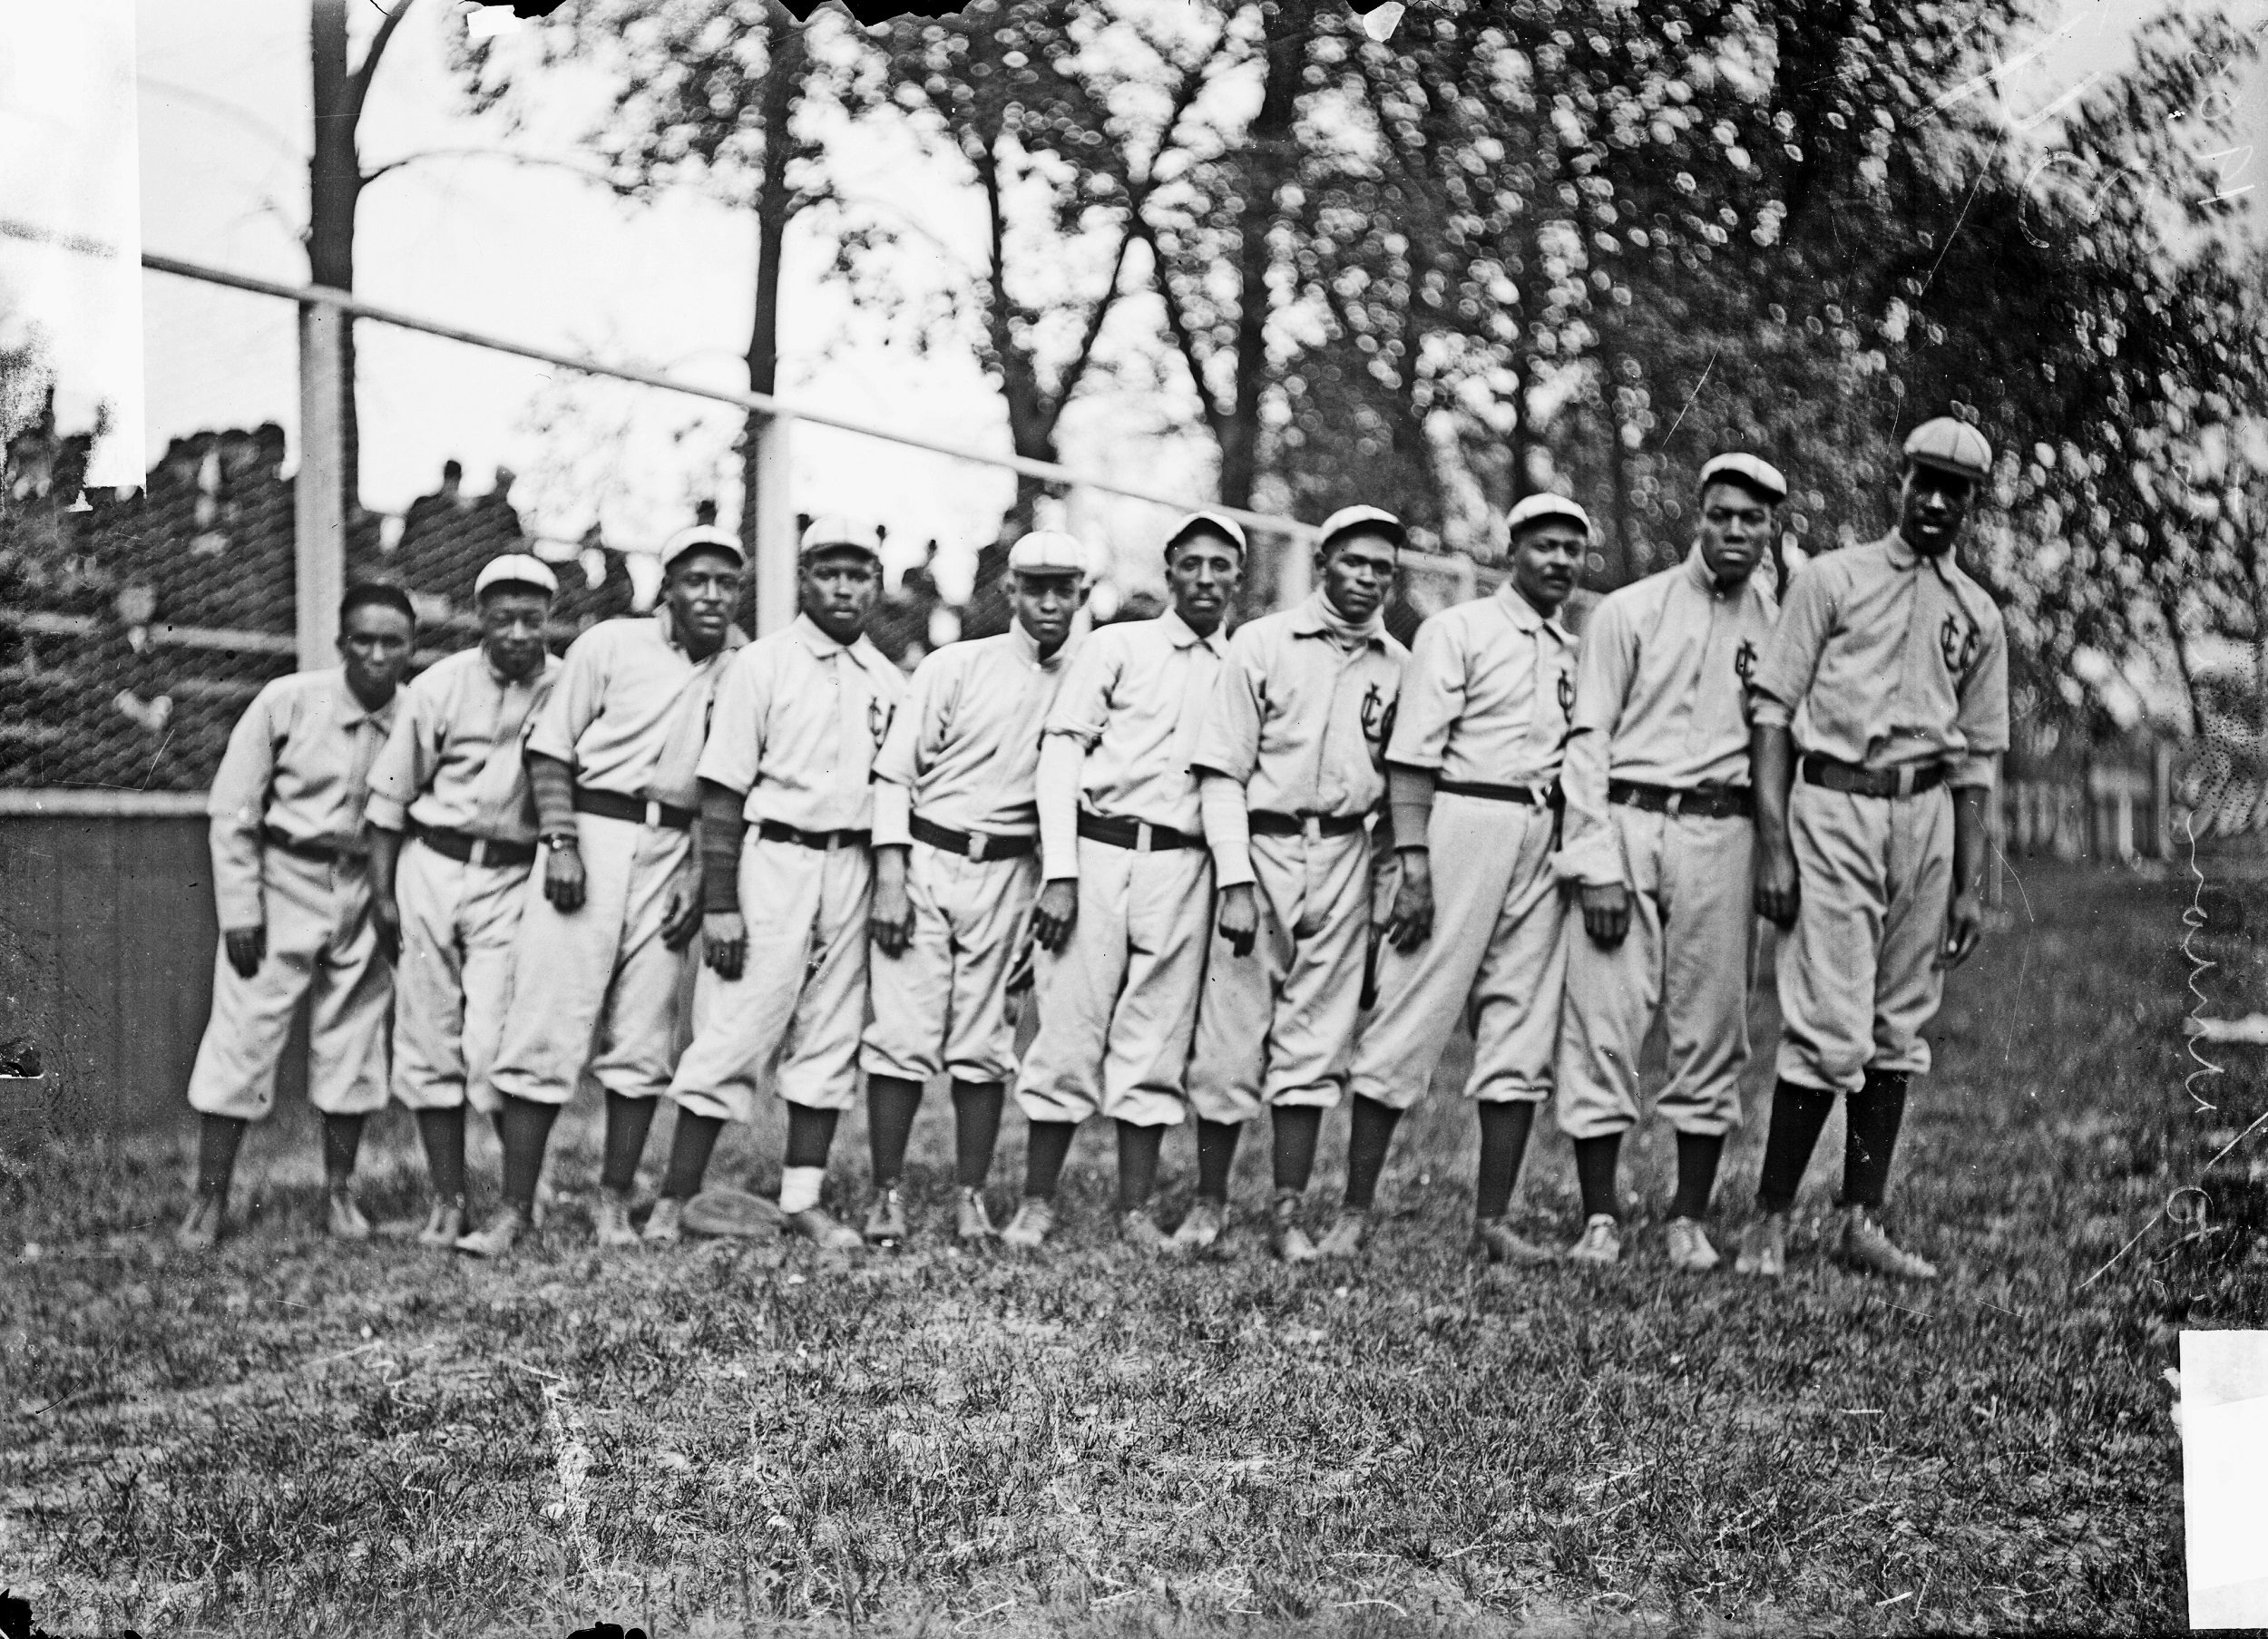 Negro National League's Chicago American Giants baseball team players standing on the field